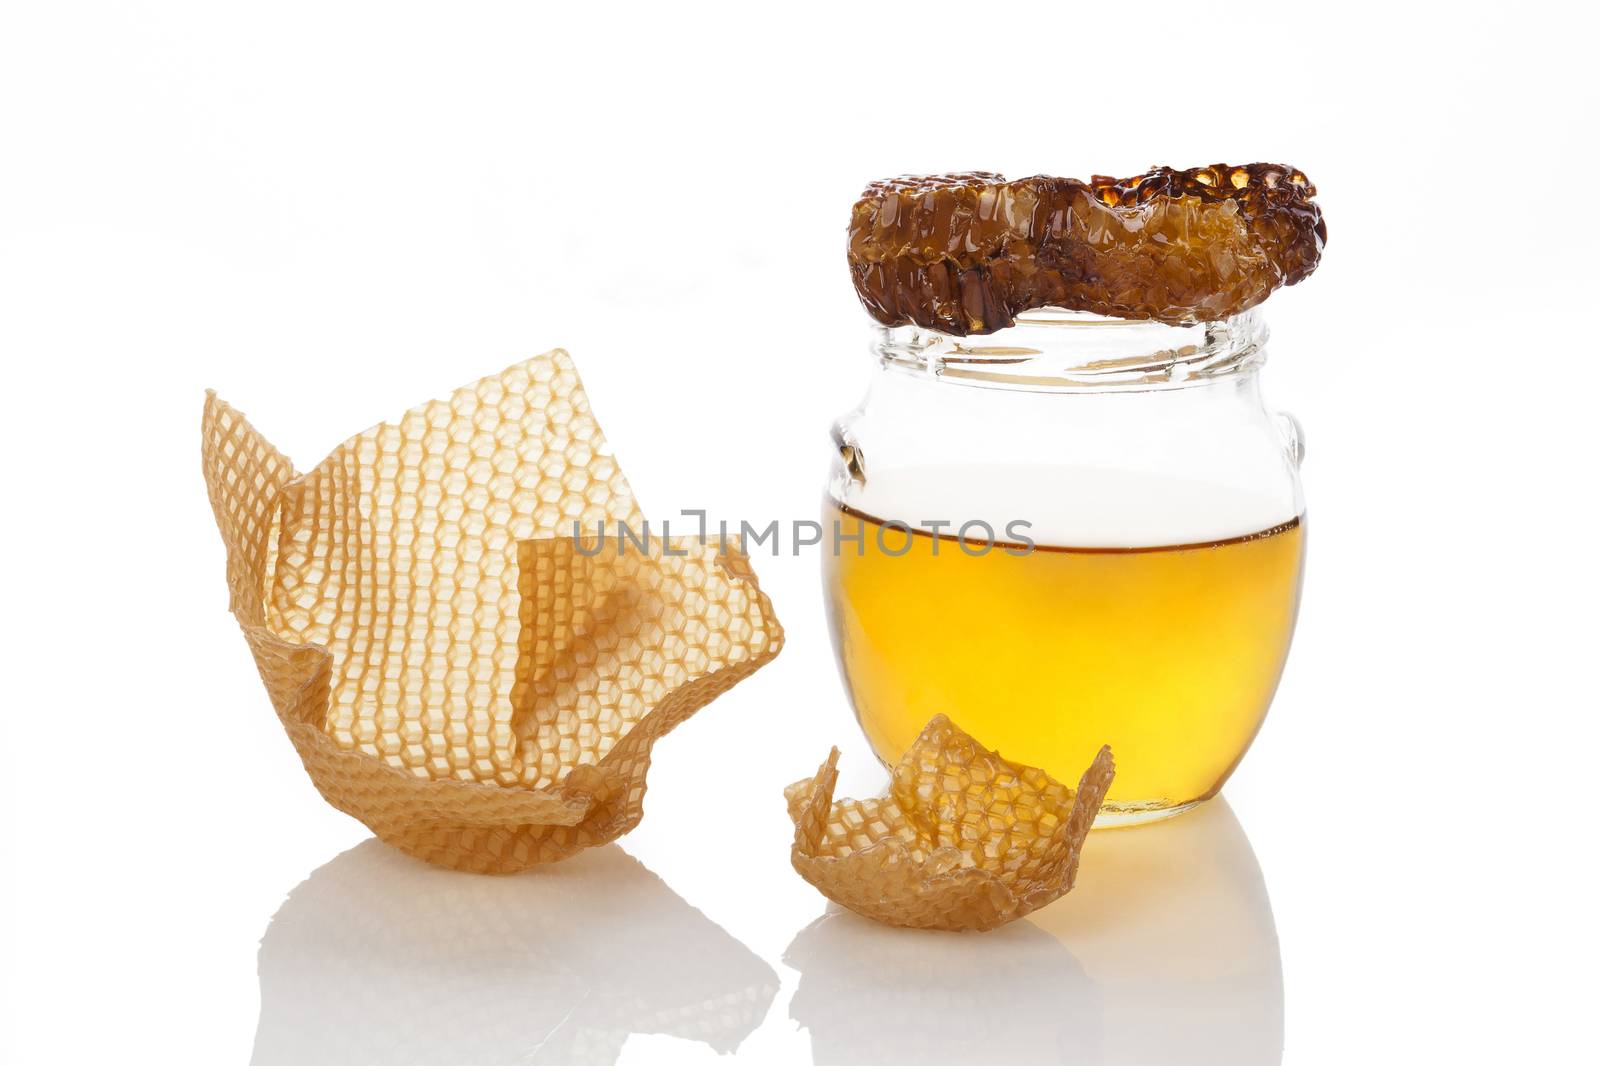 Organic honey with honey comb and honey cups isolated on white background. Natural healthy sweetener.